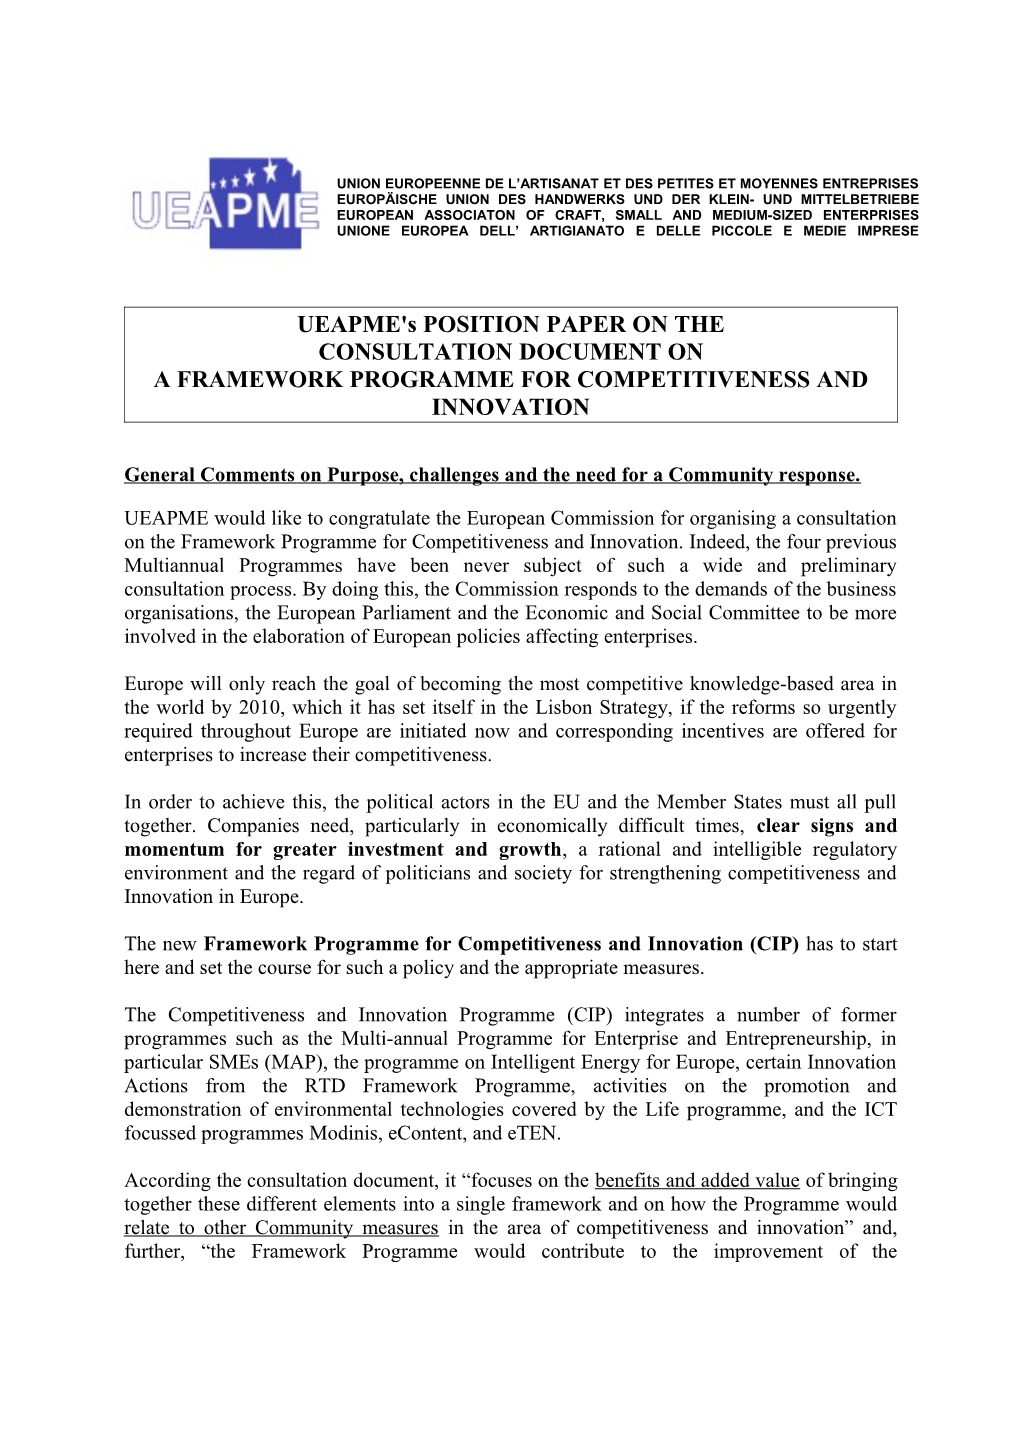 UEAPME's POSITION PAPER on THE